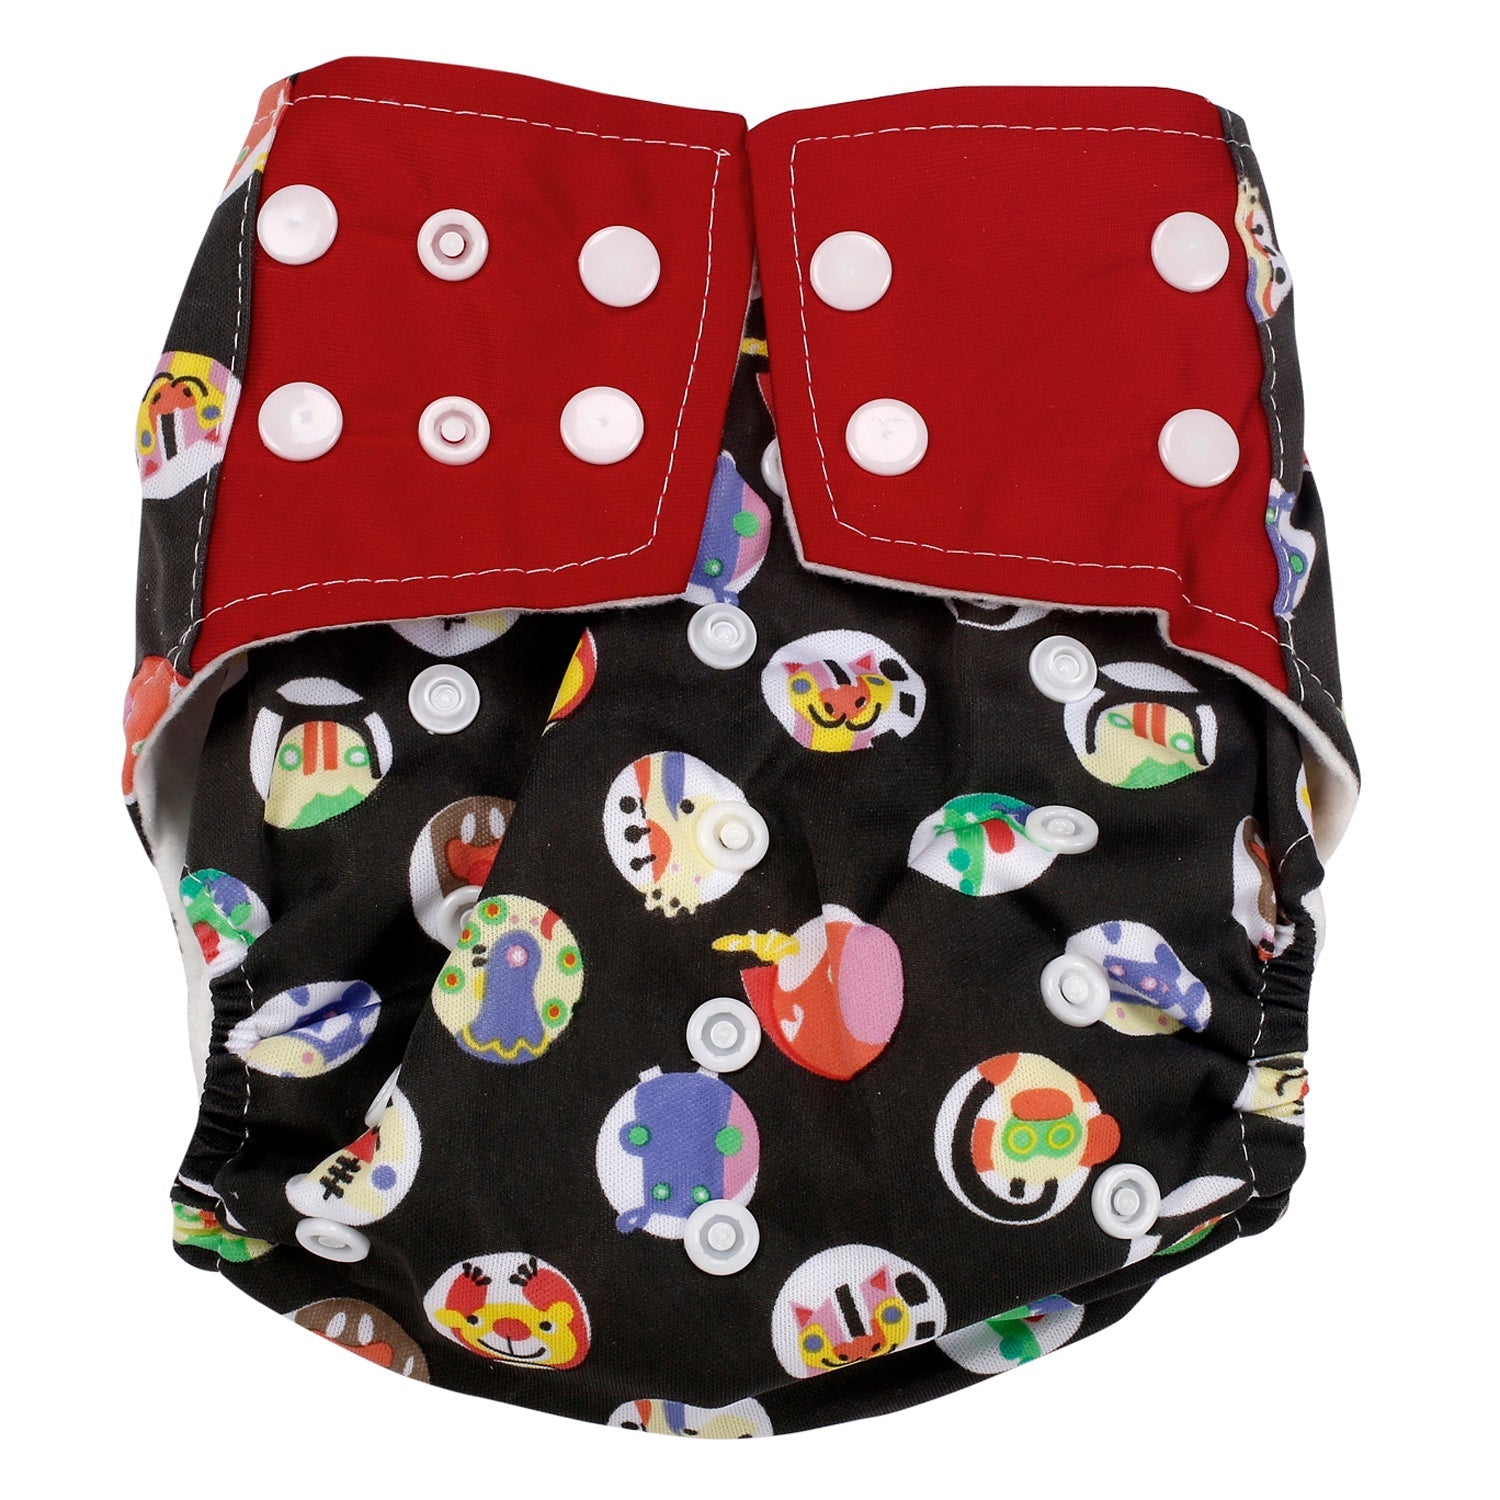 I Love Animals Black And Red Reusable Diaper - Baby Moo